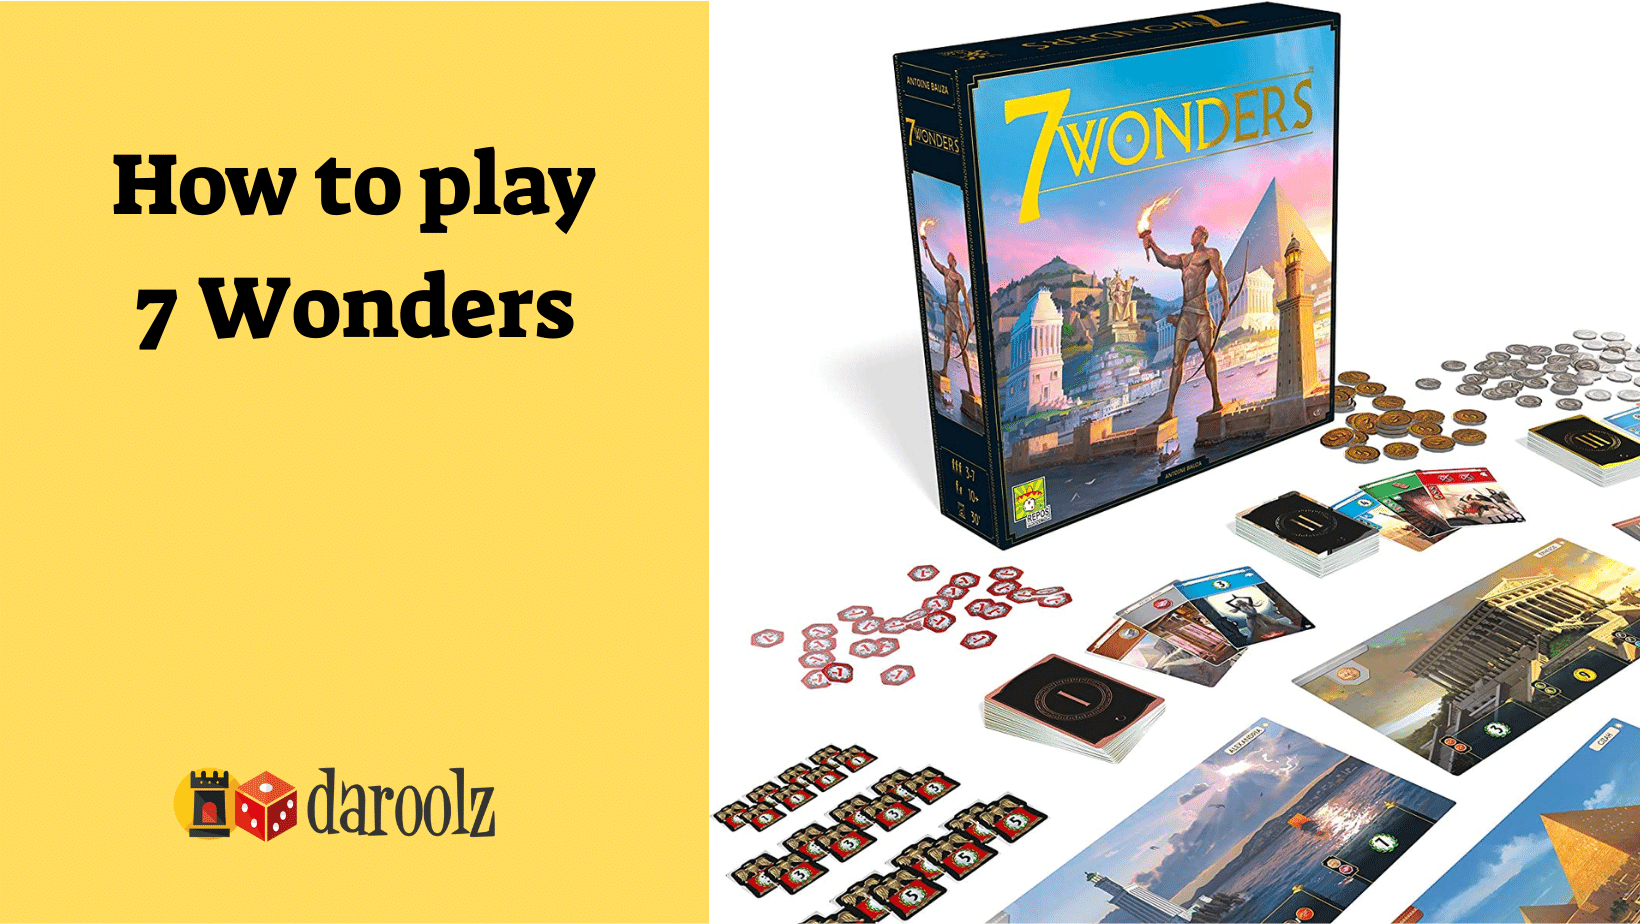 How to play 7 wonders